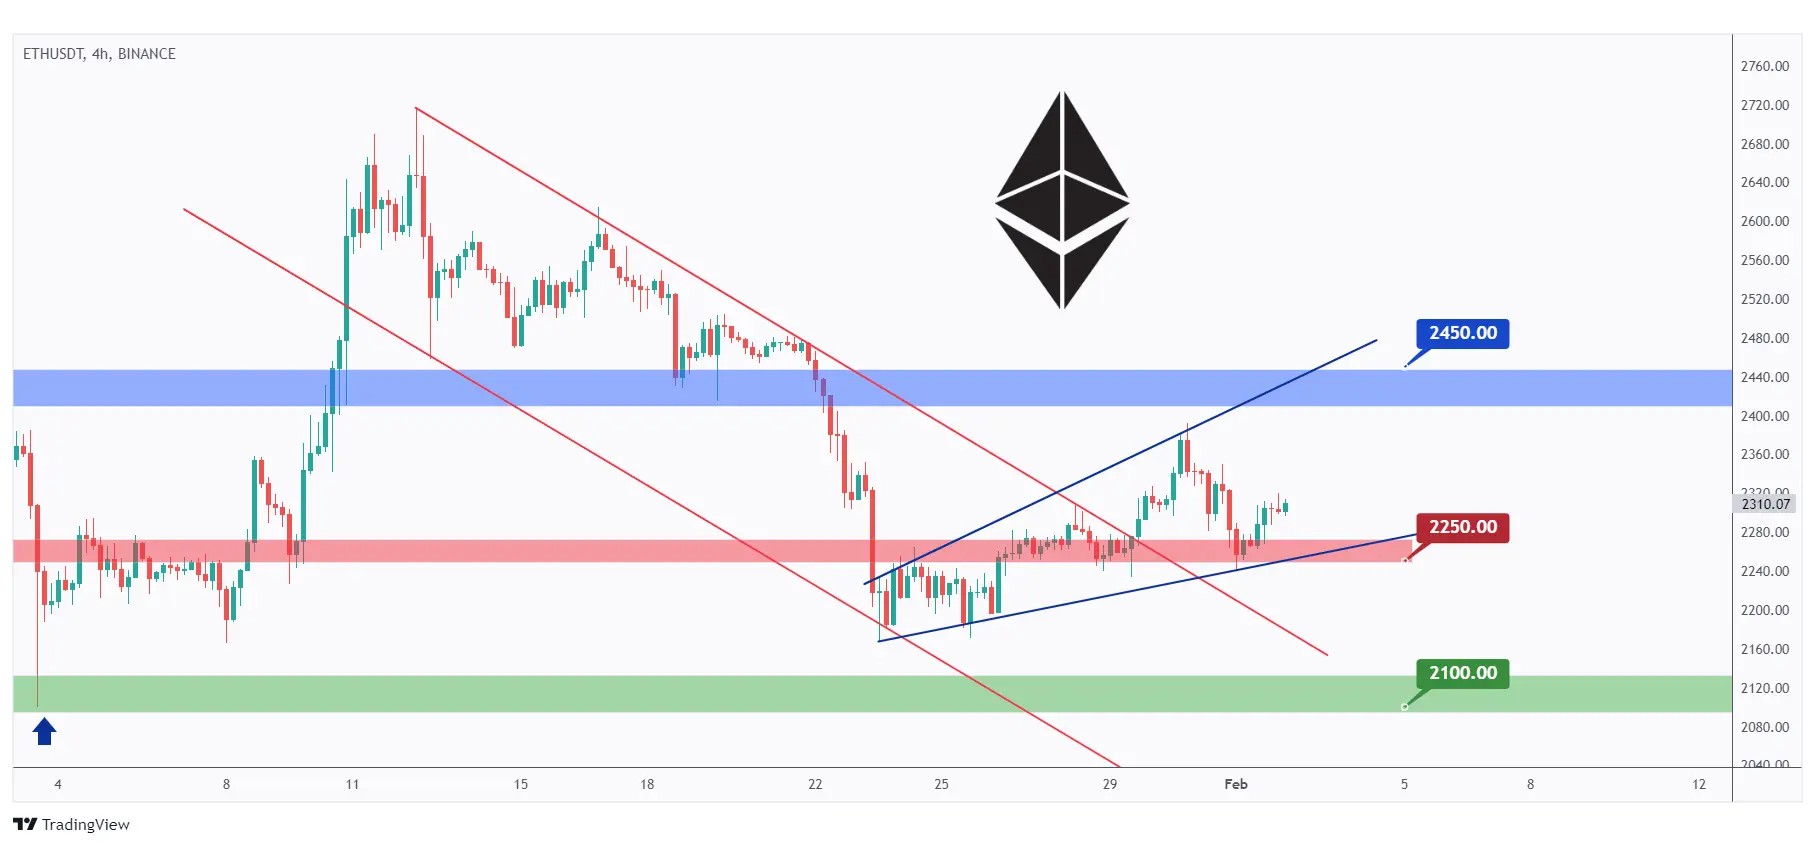 ETH 4h chart showing the overall bullish sentiment trading inside a rising channel targeting the $2450 resistance.